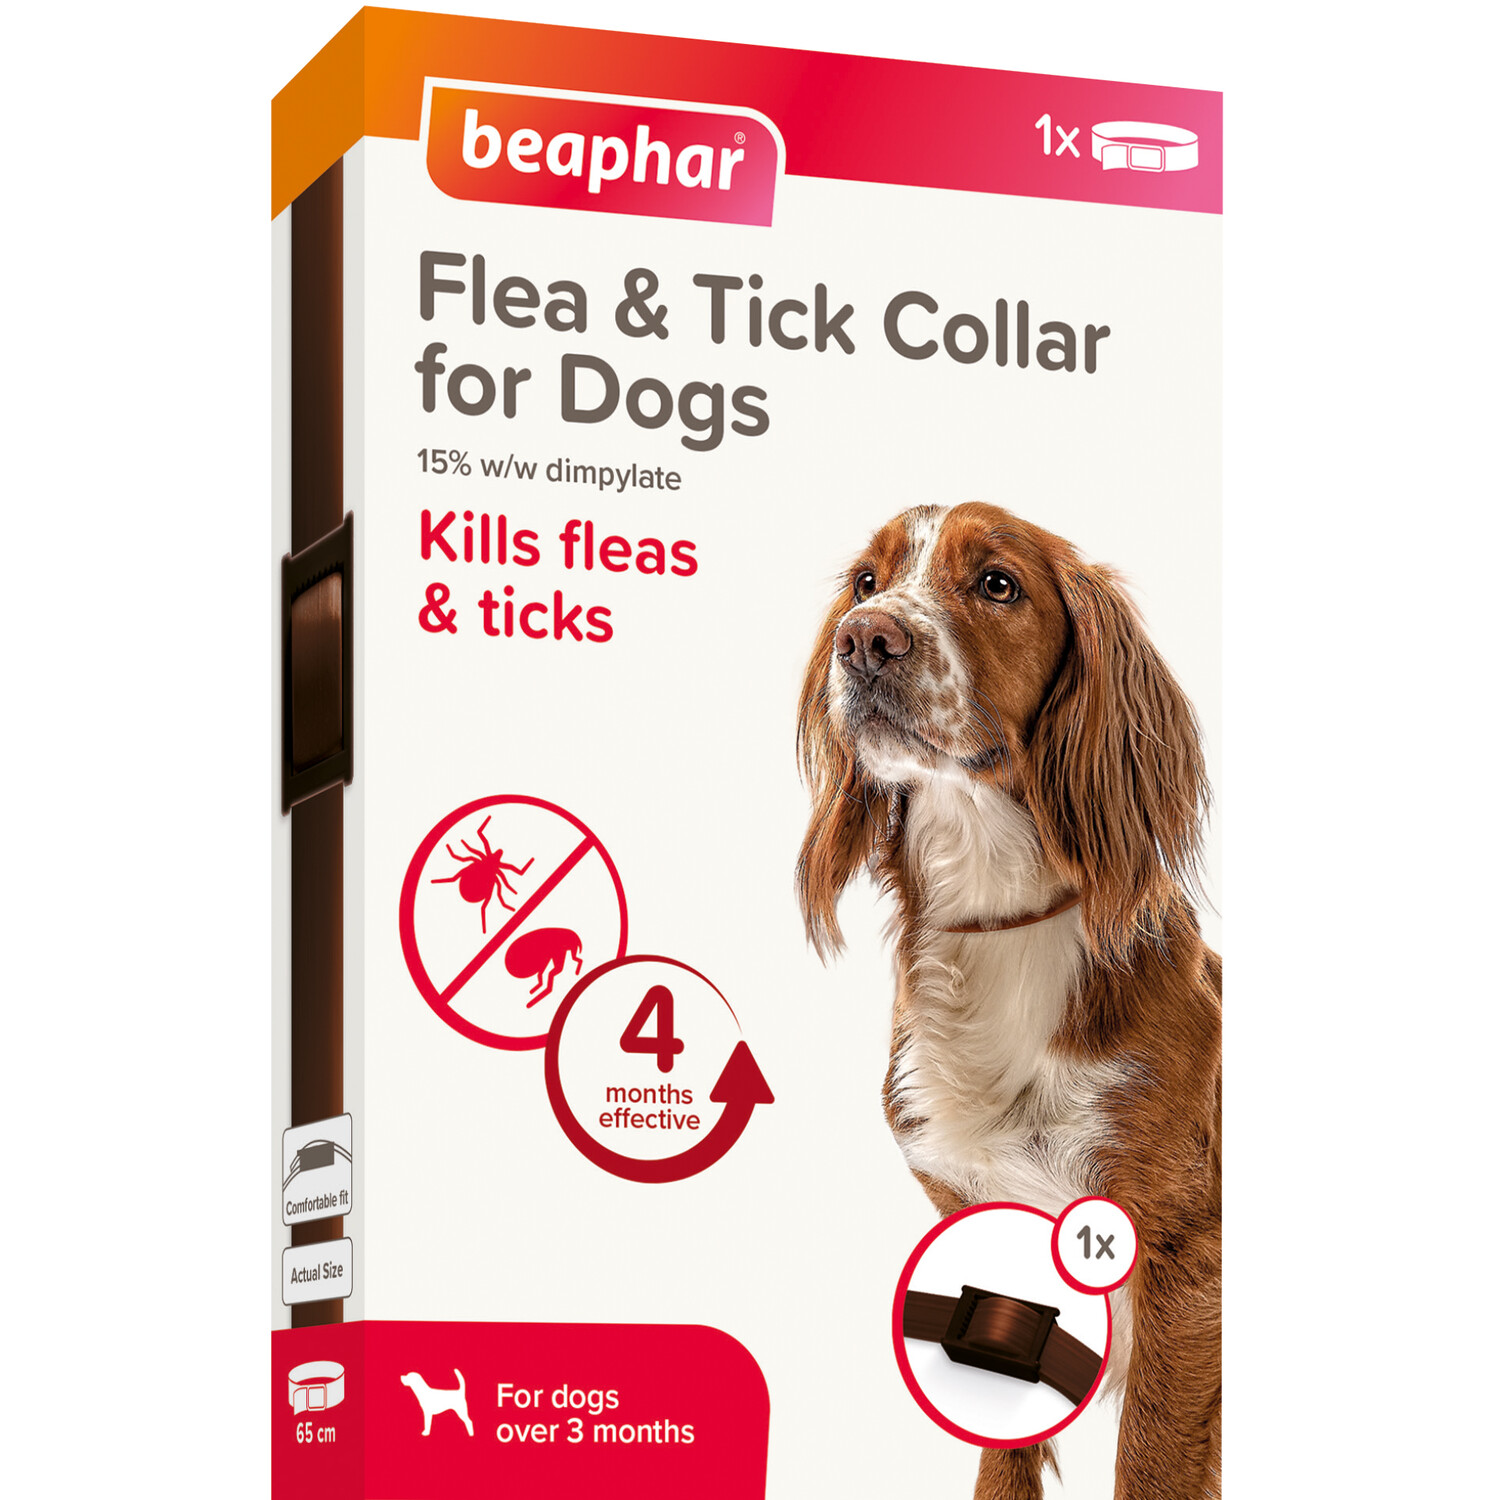 Beaphar Flea and Tick Collar for Dogs - Brown Image 1